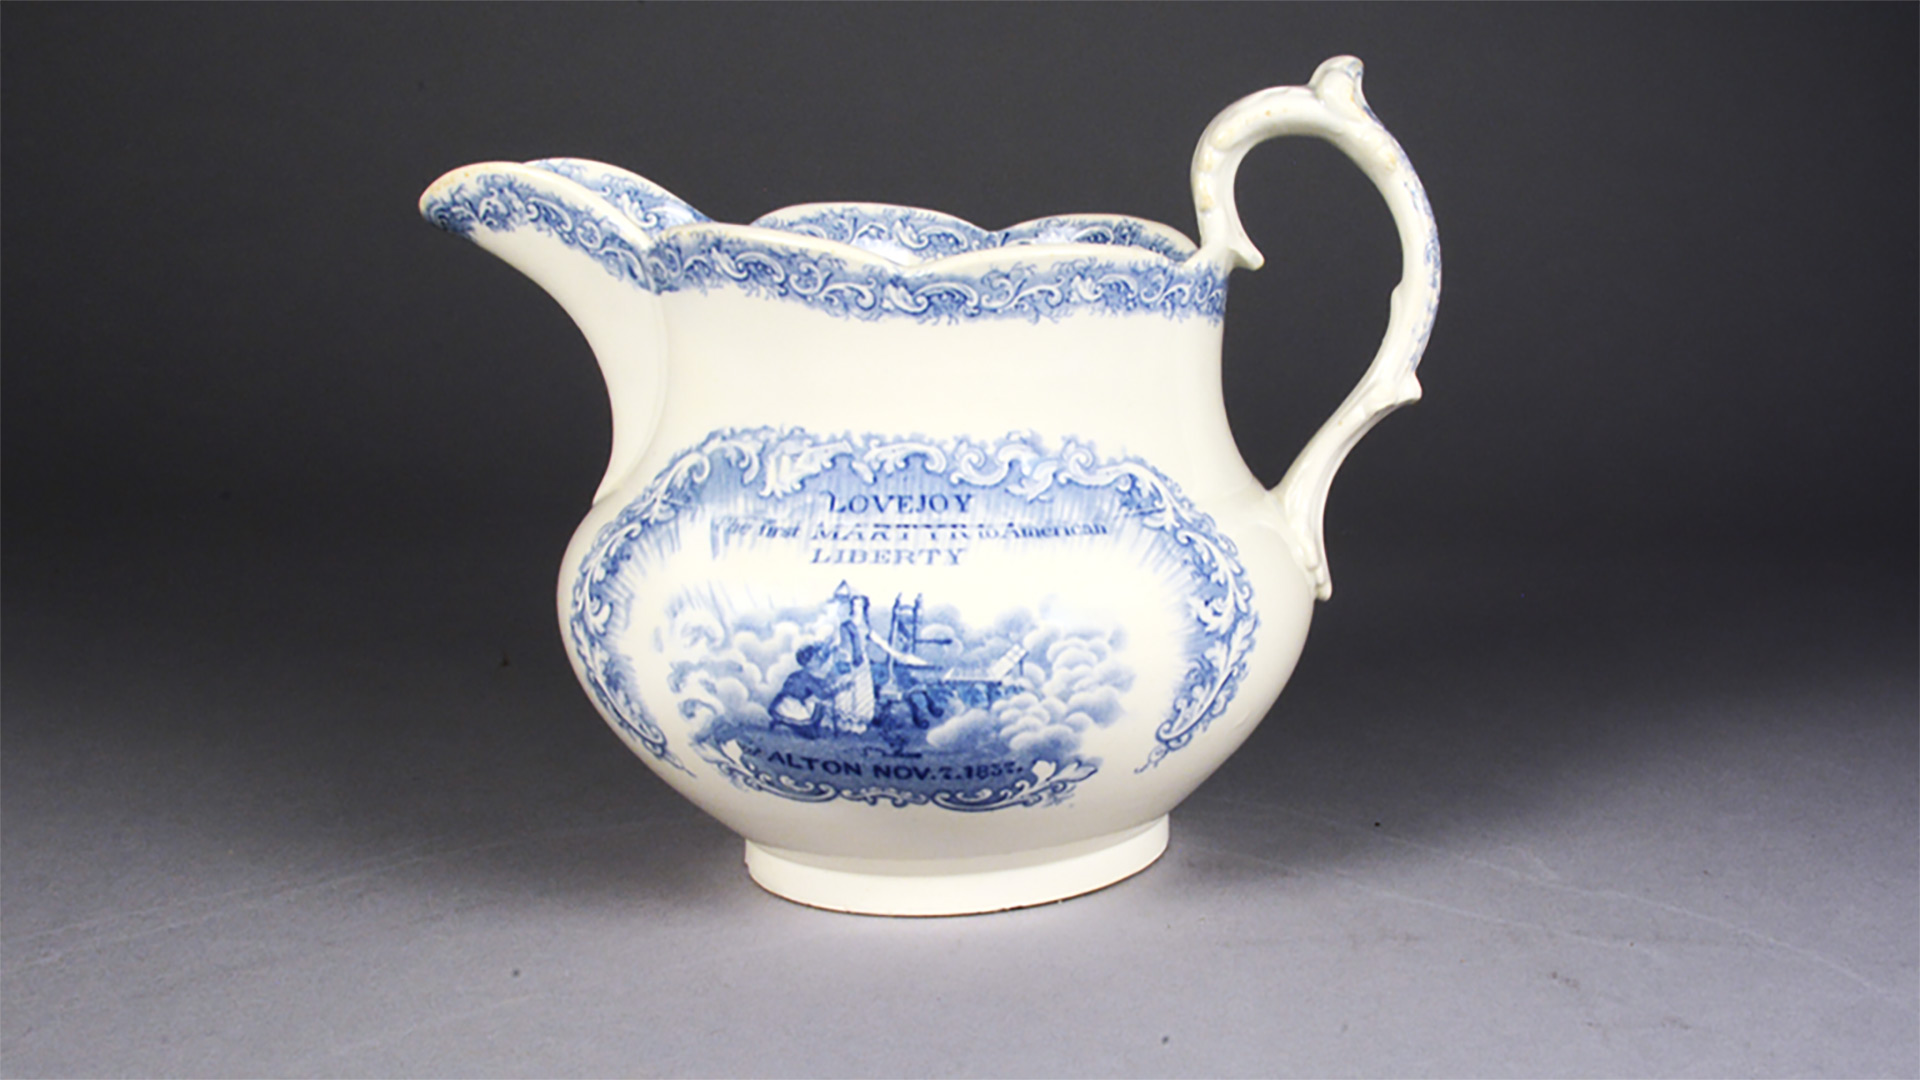 White pitcher with blue design that reads 